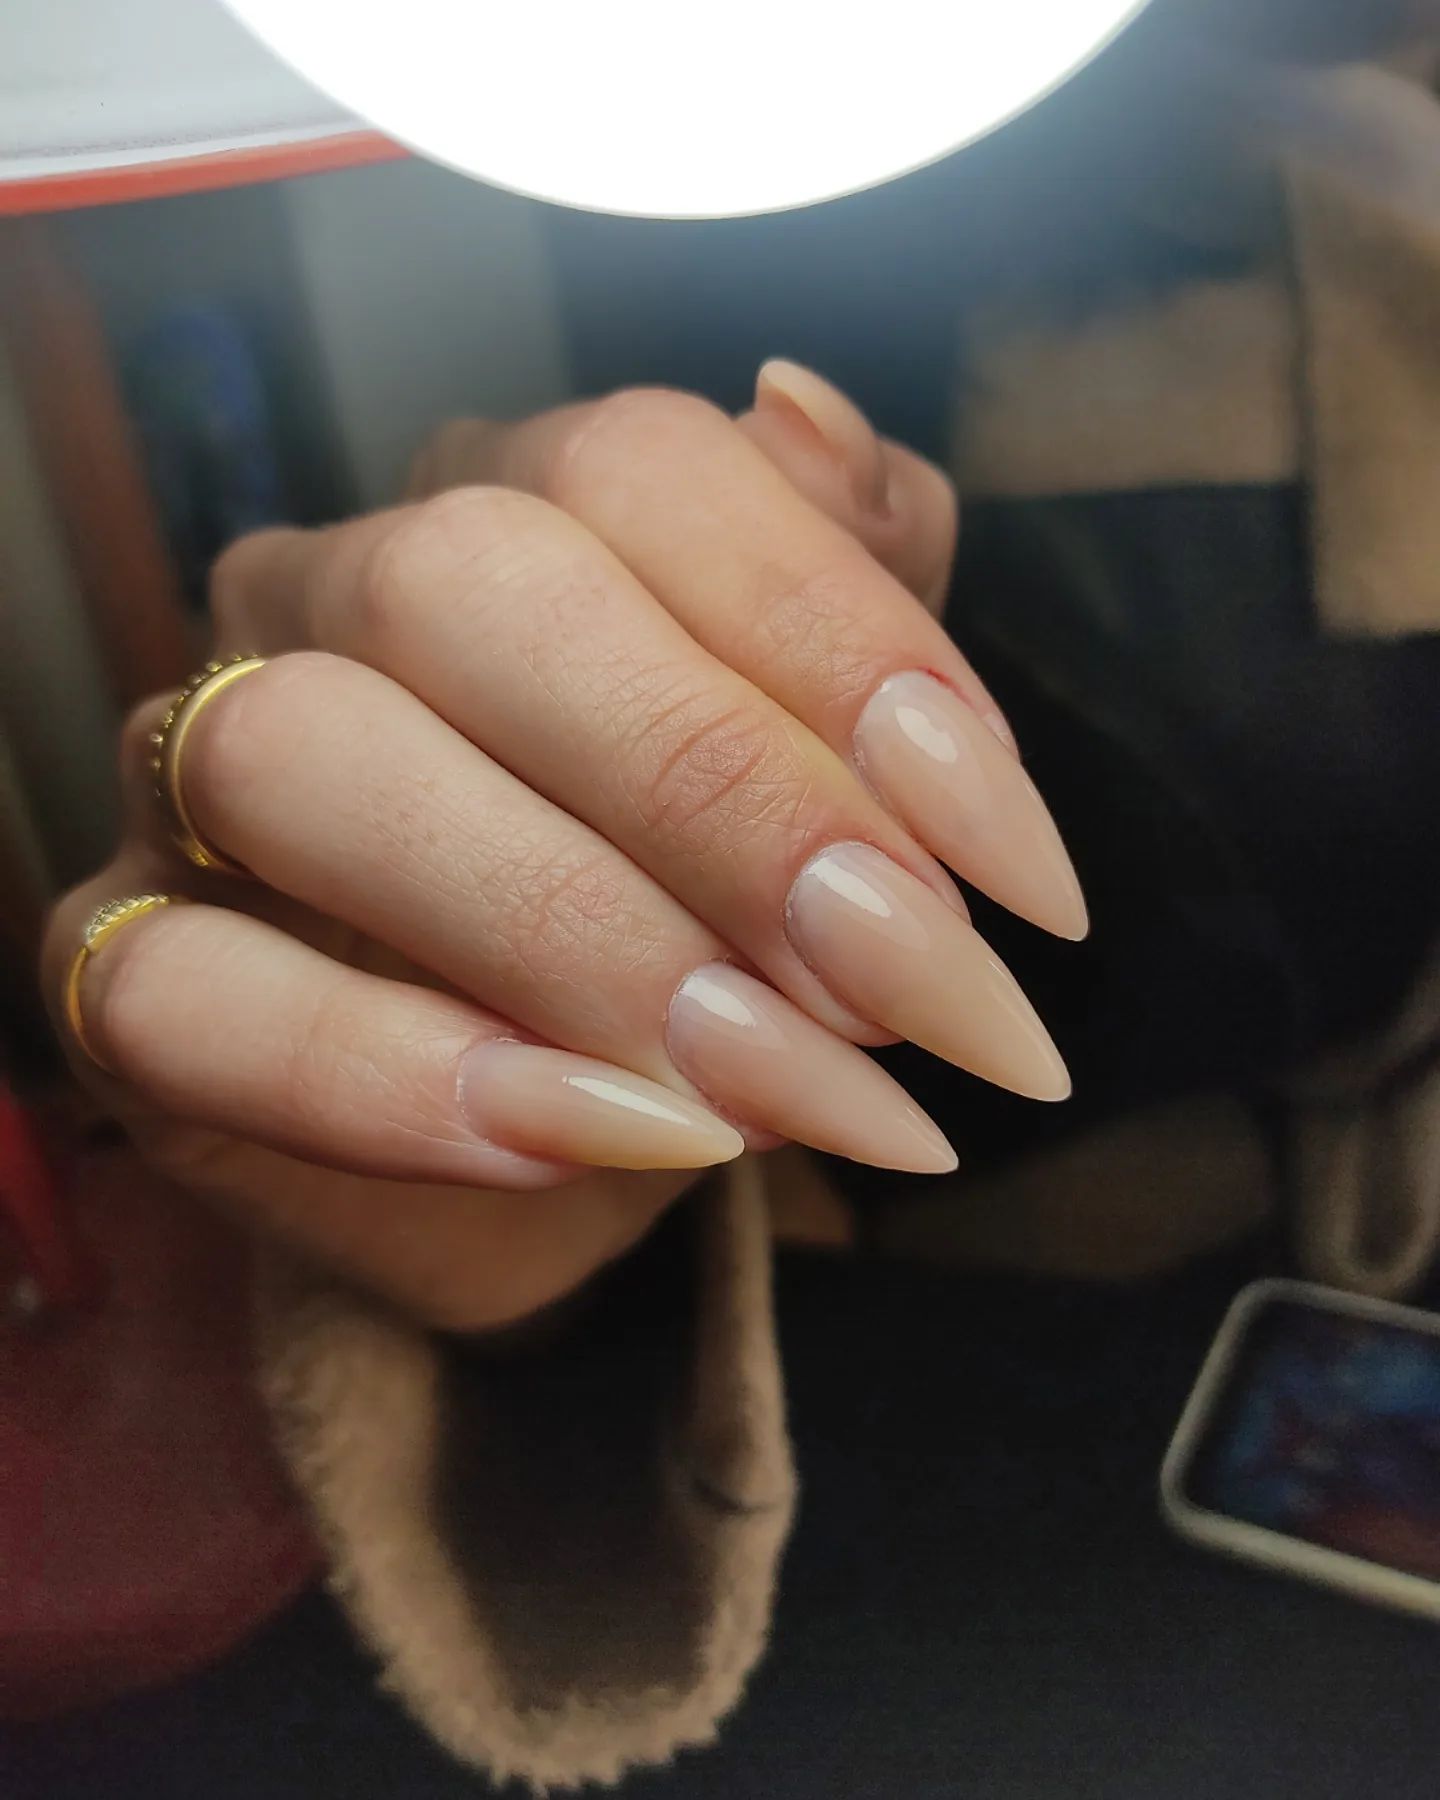 To get a clean and chic look, there is no better nail polish than this nude shade. Go for it if you like this clean nail design.